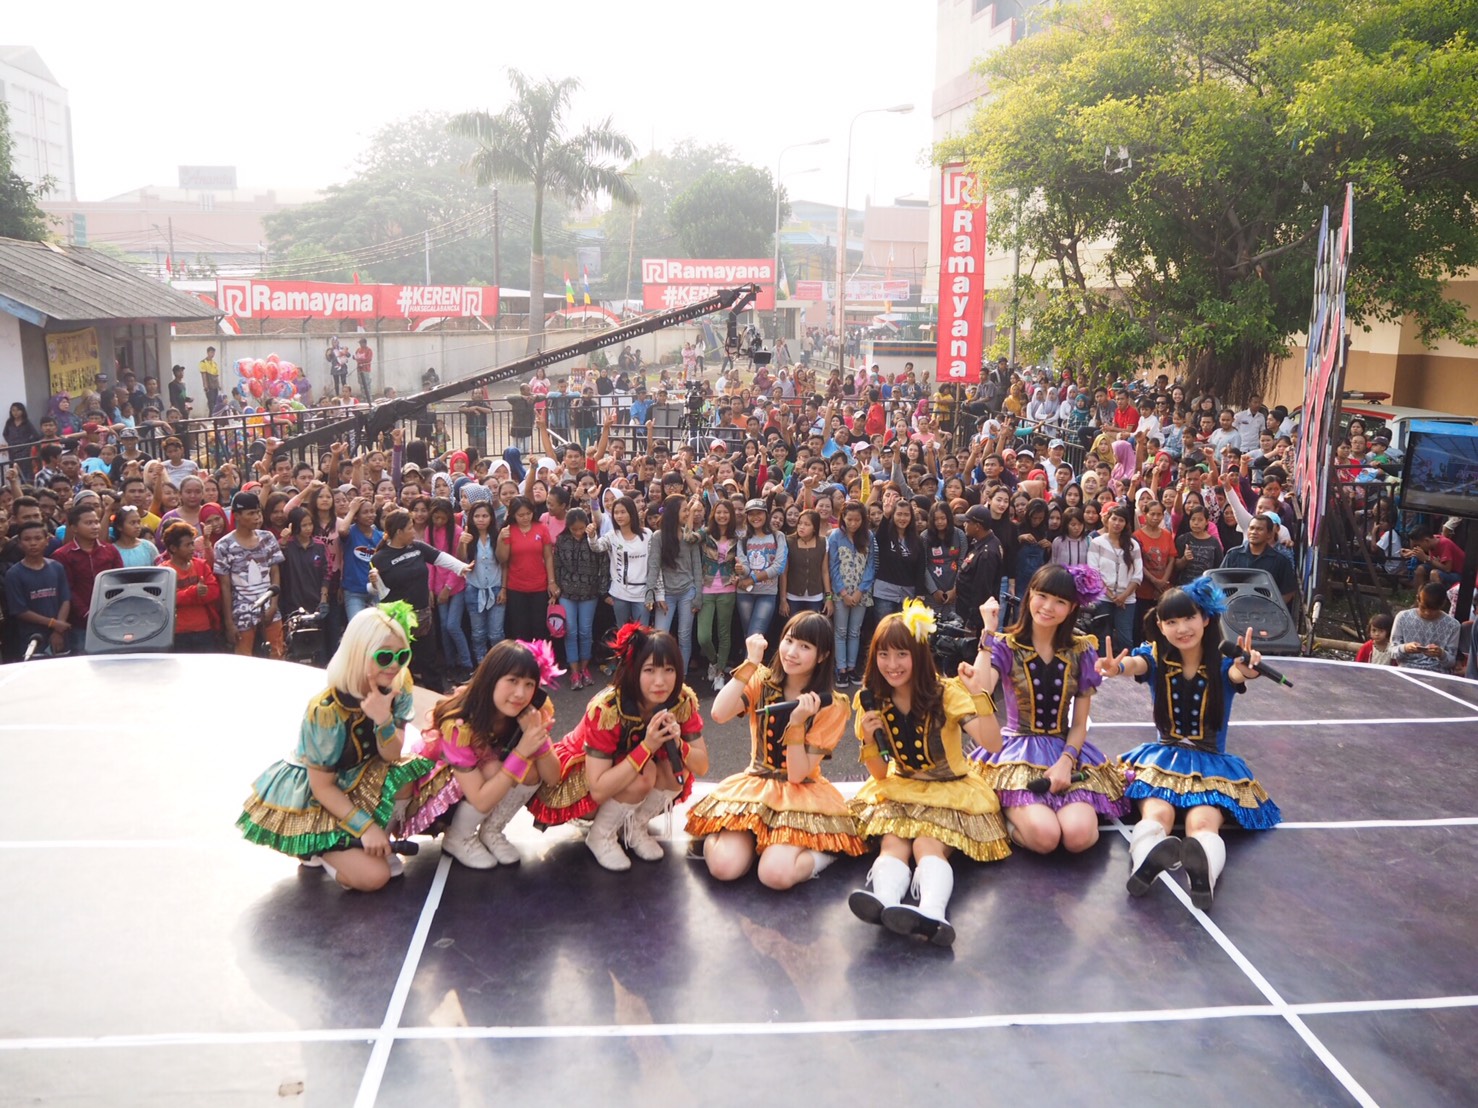 Wasshoi Indonesia! FES☆TIVE Achieved Live Performance at The University of Indonesia